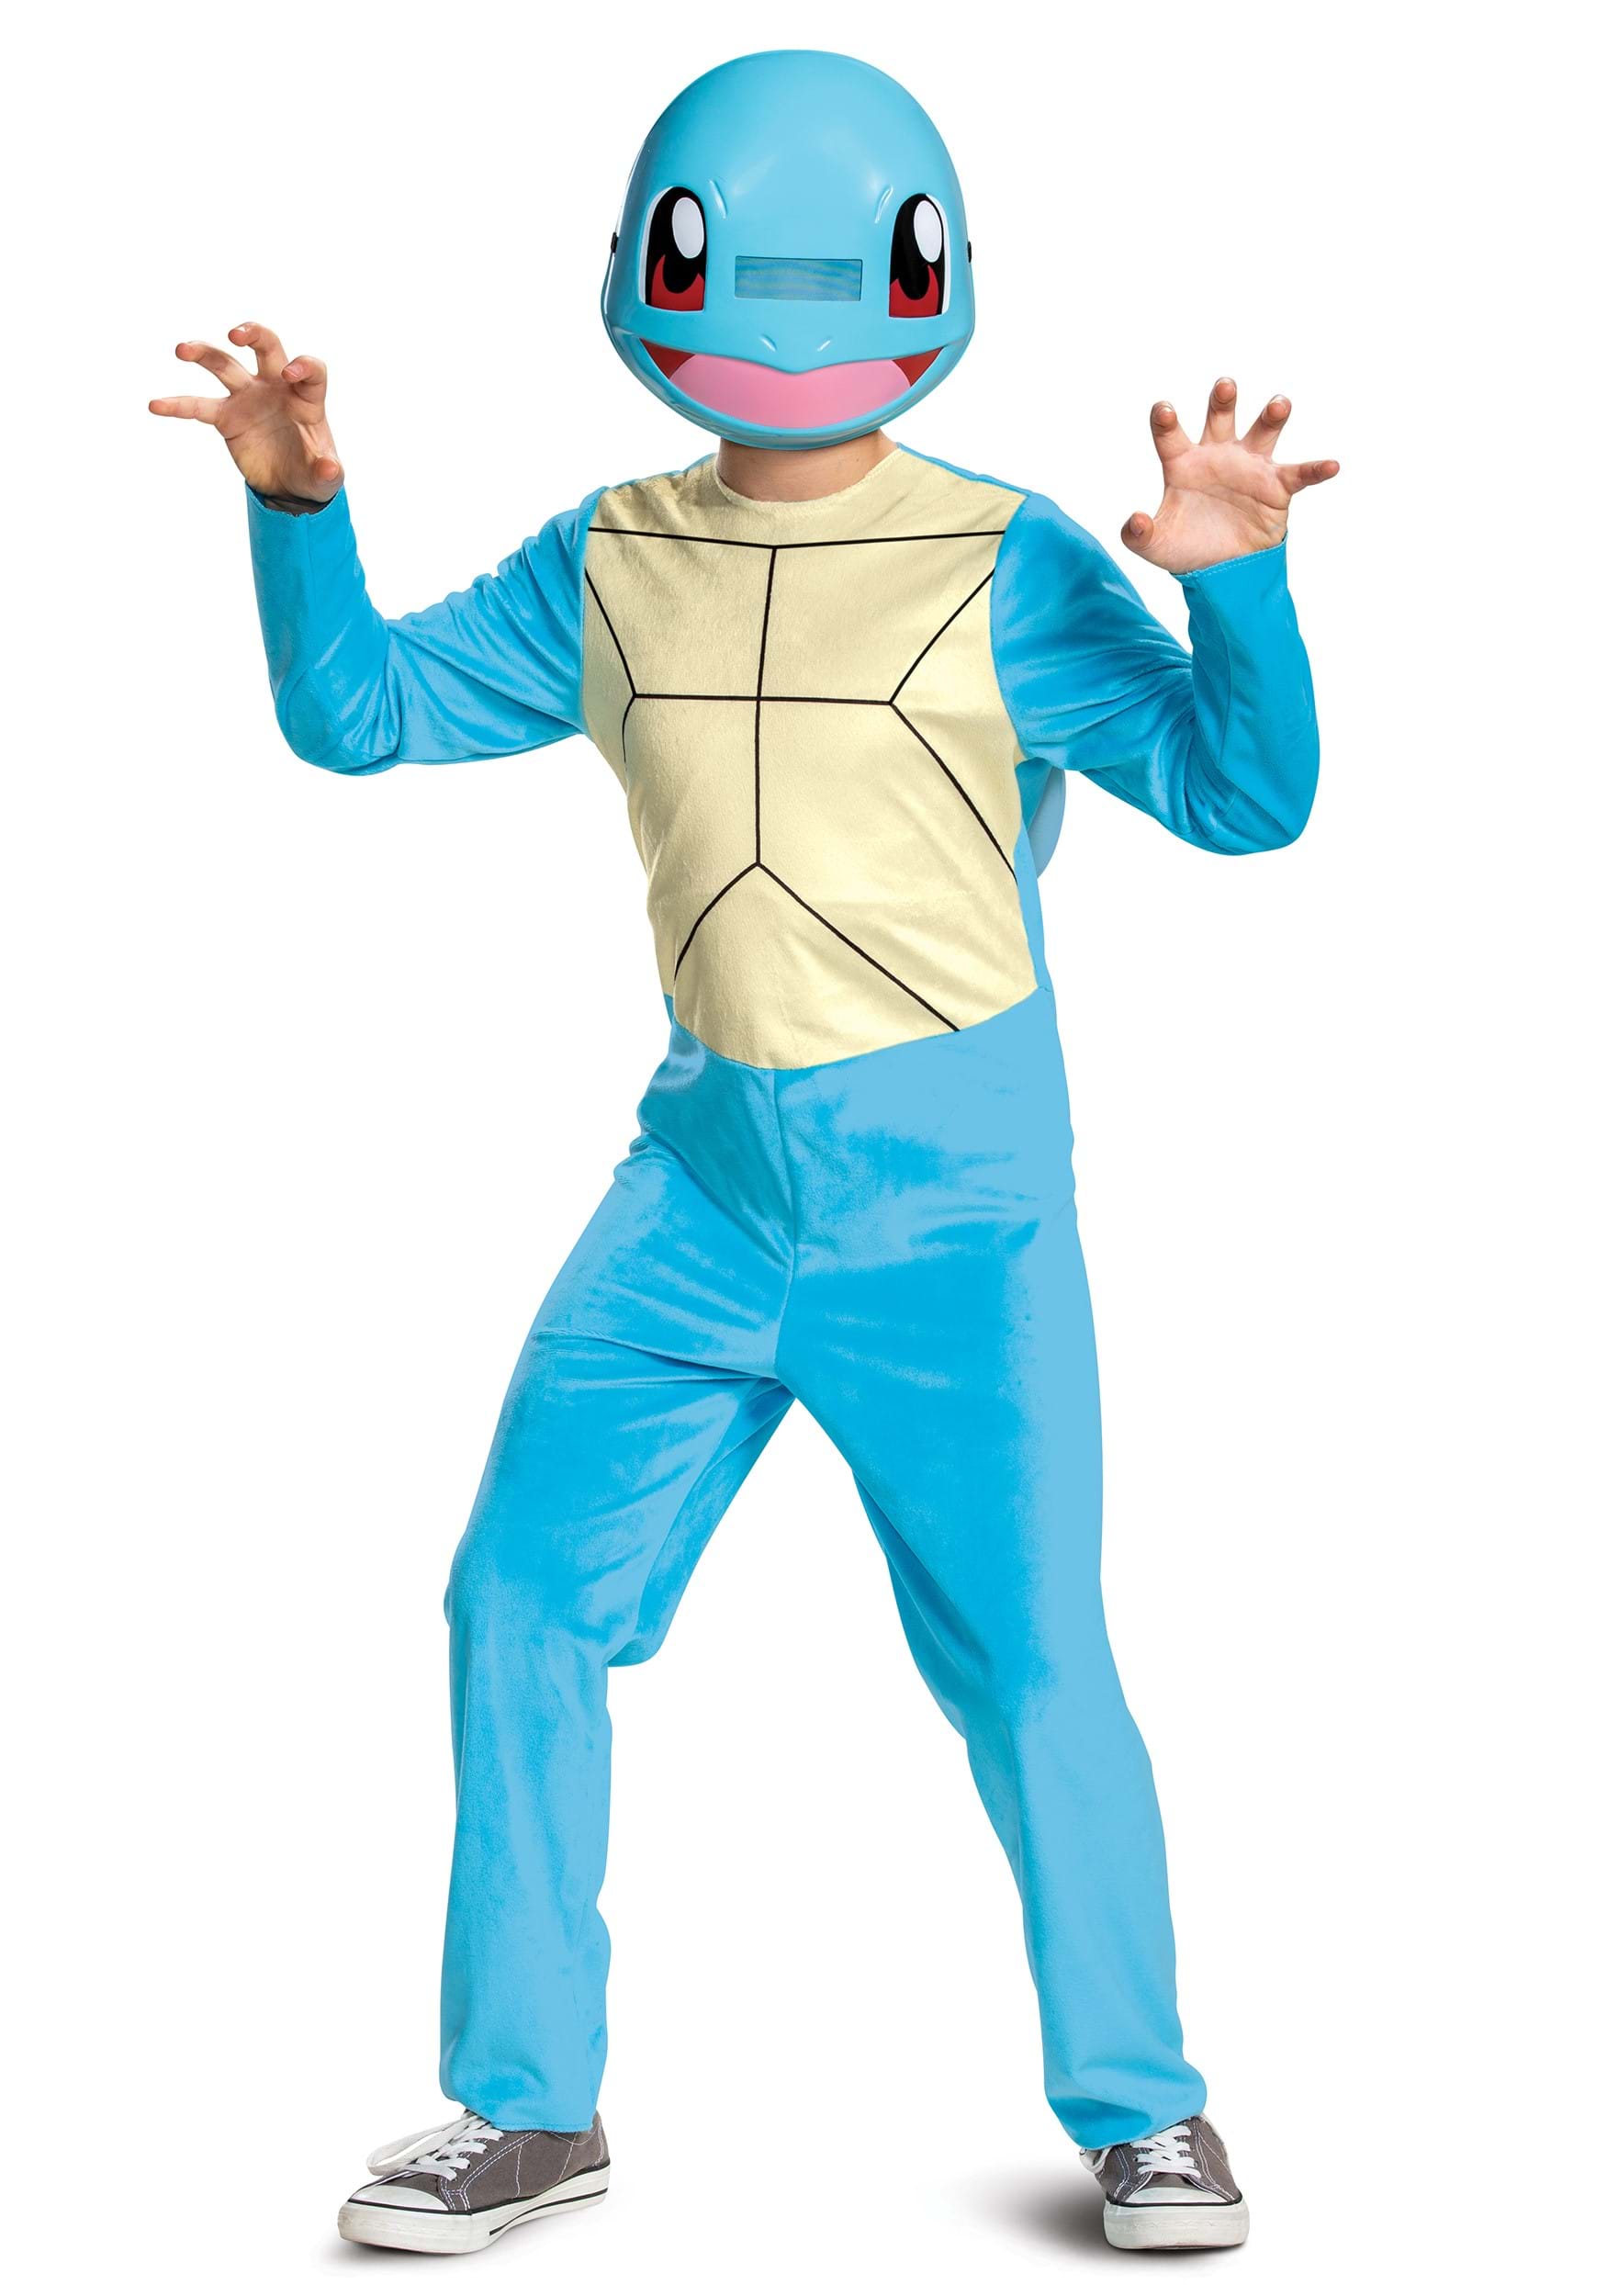 Pokémon Classic Squirtle Costume for Kids